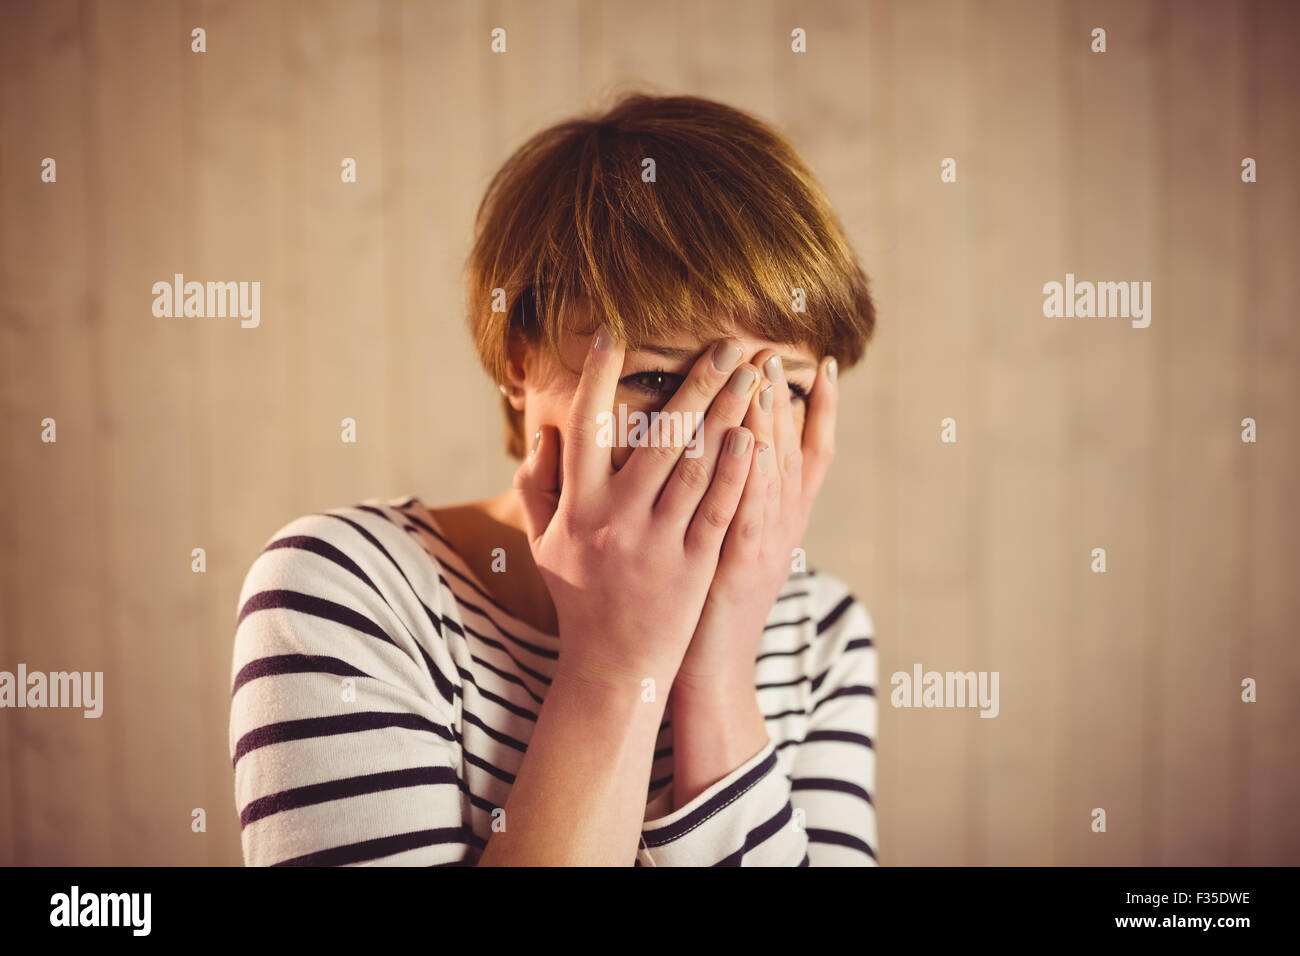 Pretty short hair woman hiding her face behind her hands Stock Photo